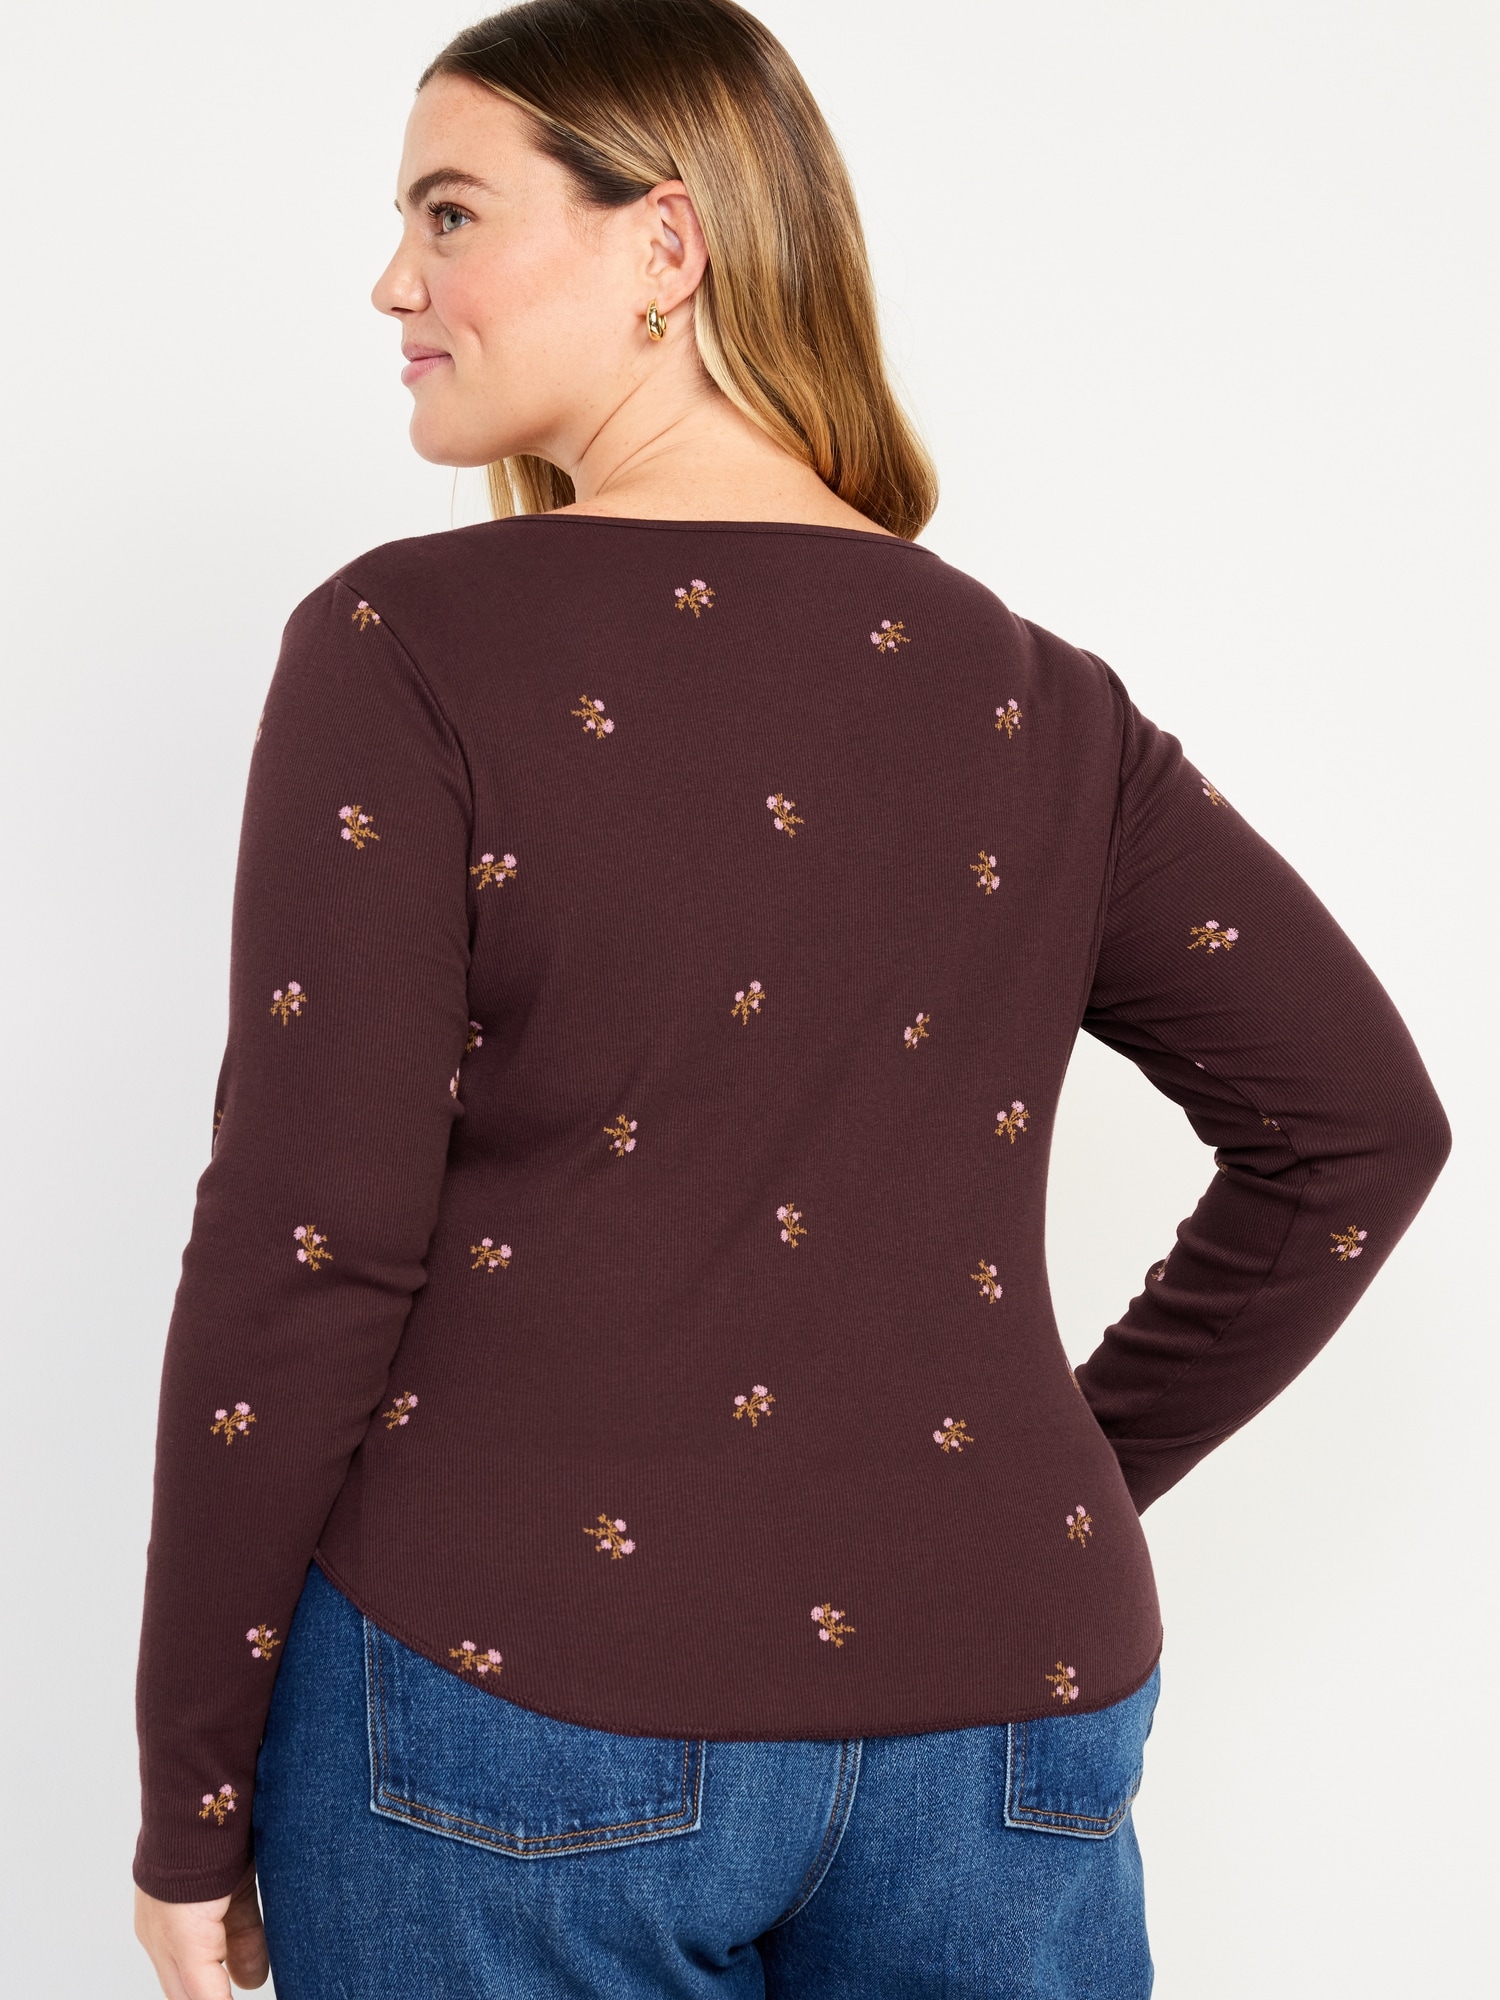 Fitted Long-Sleeve Rib-Knit T-Shirt Old Navy Women for 